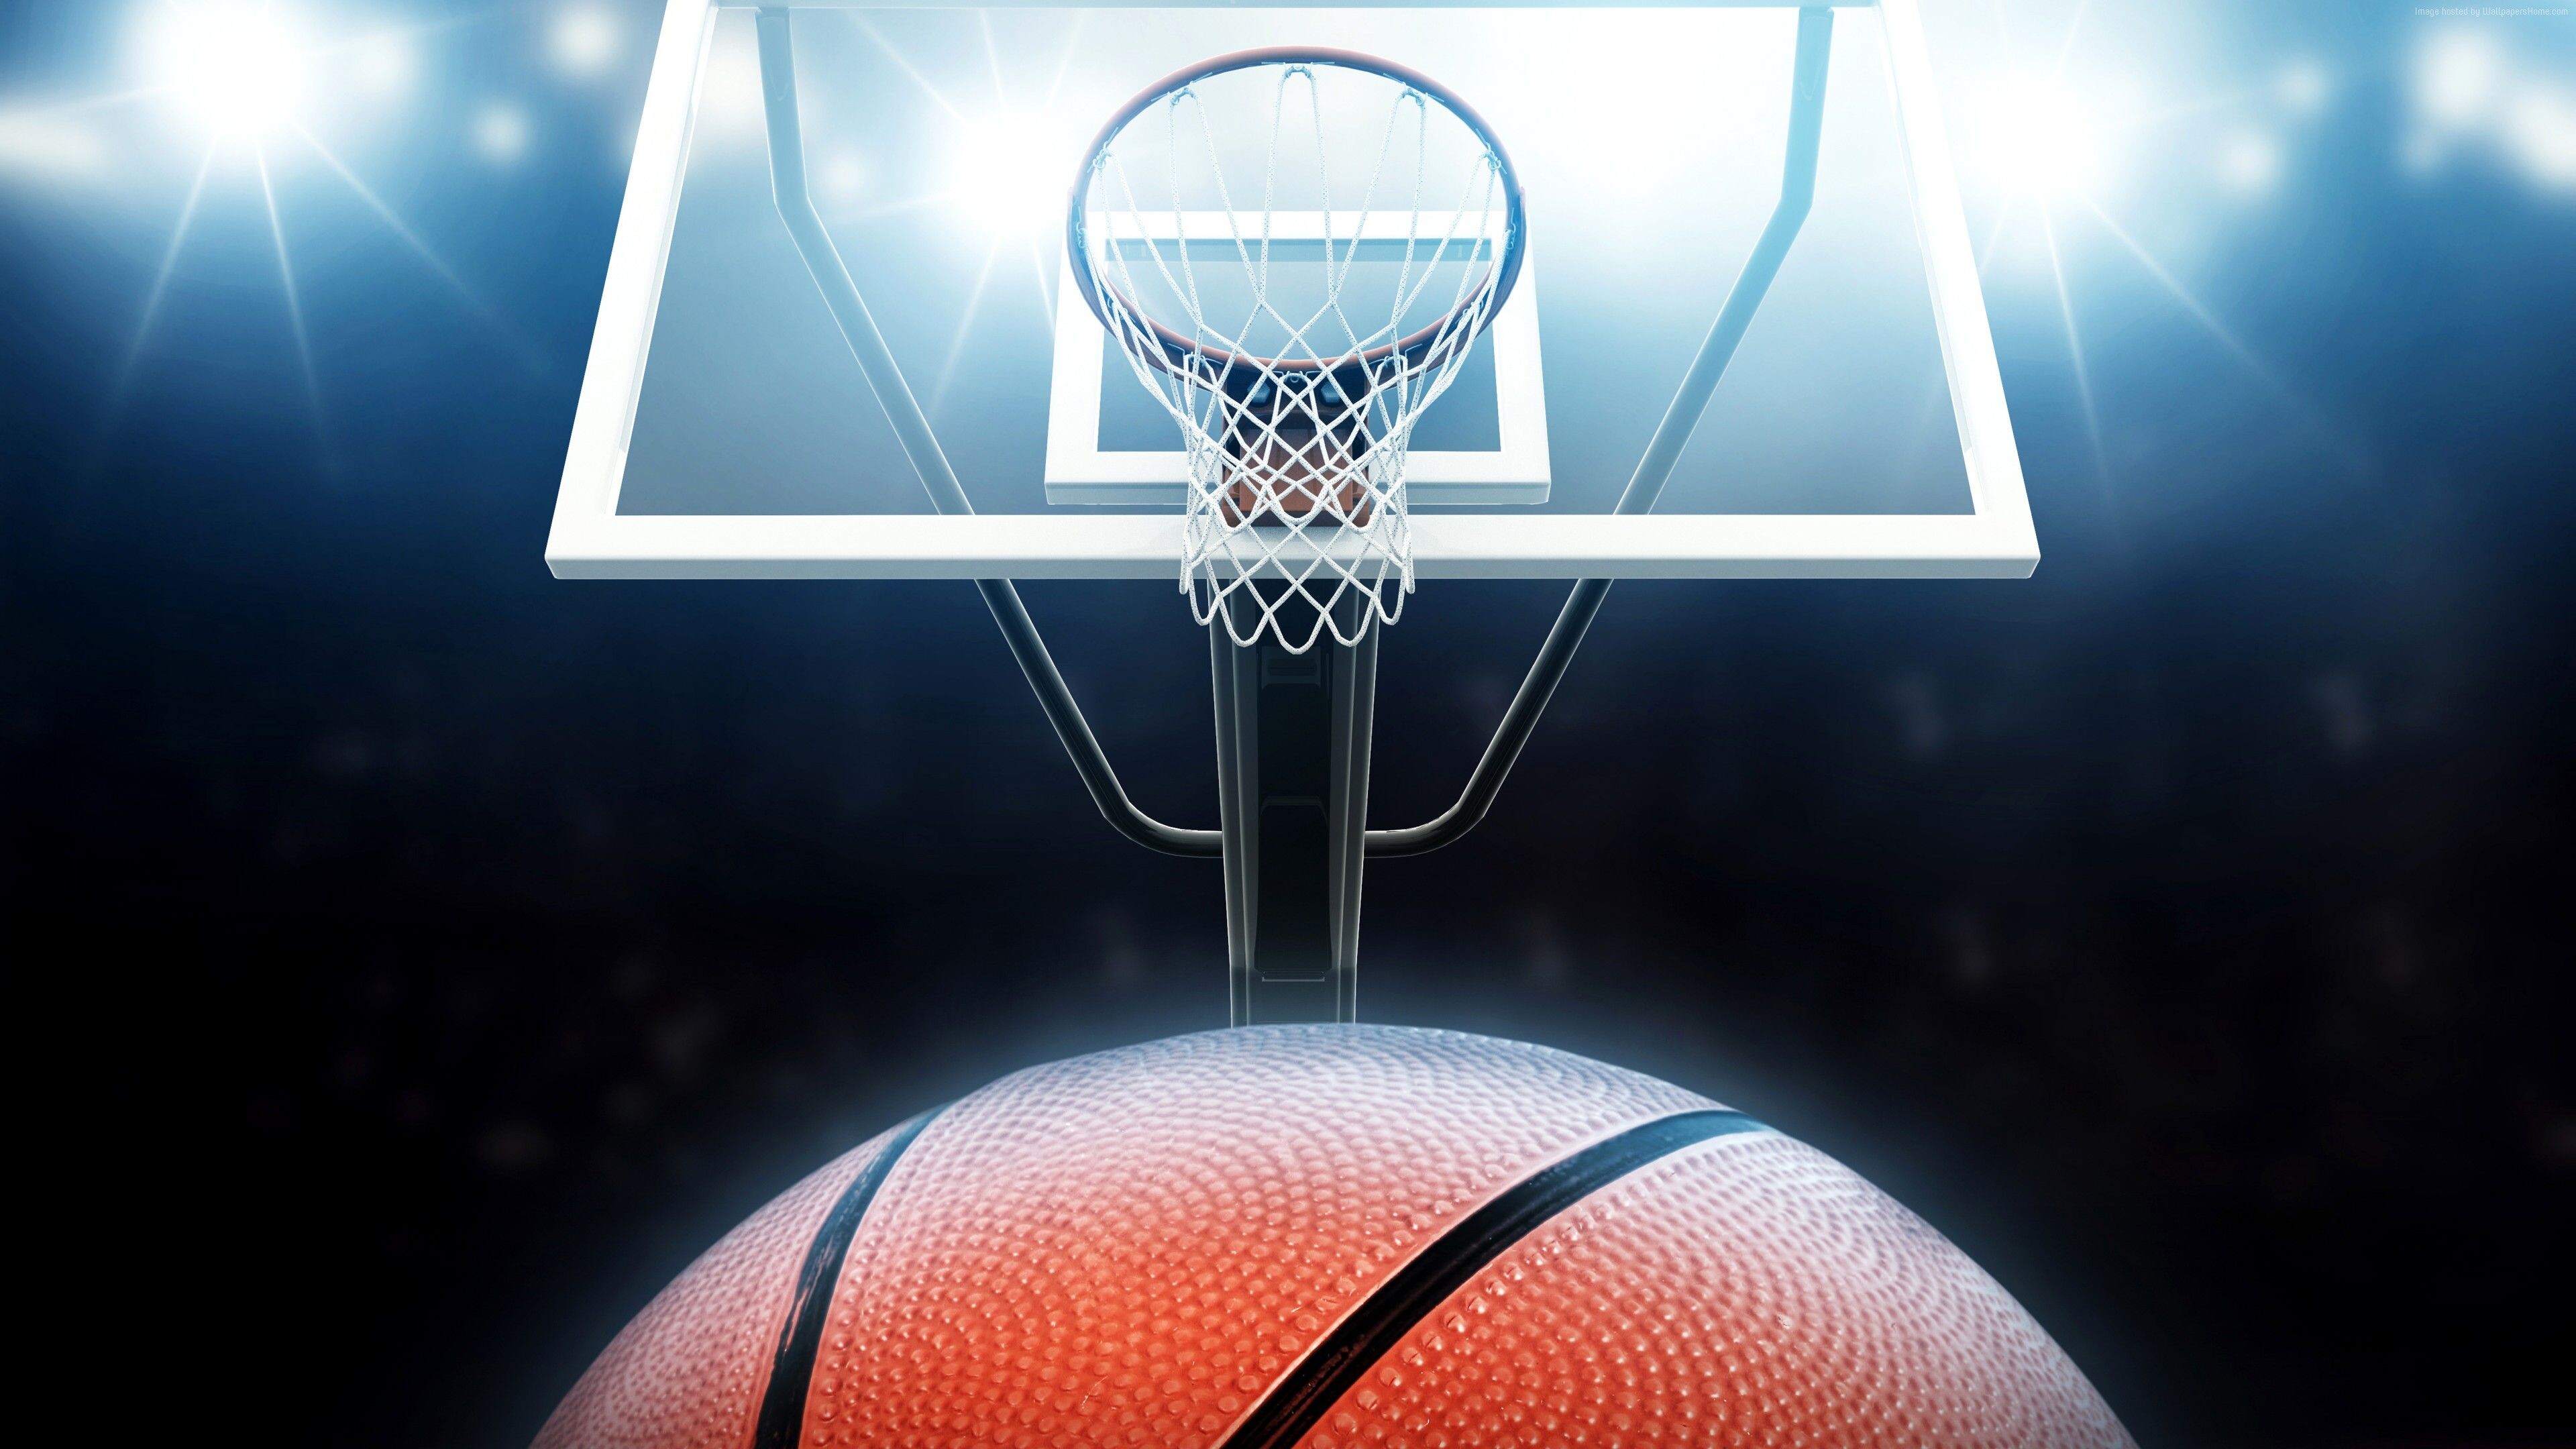 Goal (Sports): Basketball hoop, Making a basket and scoring points, Shooting the ball into the basket. 3840x2160 4K Wallpaper.